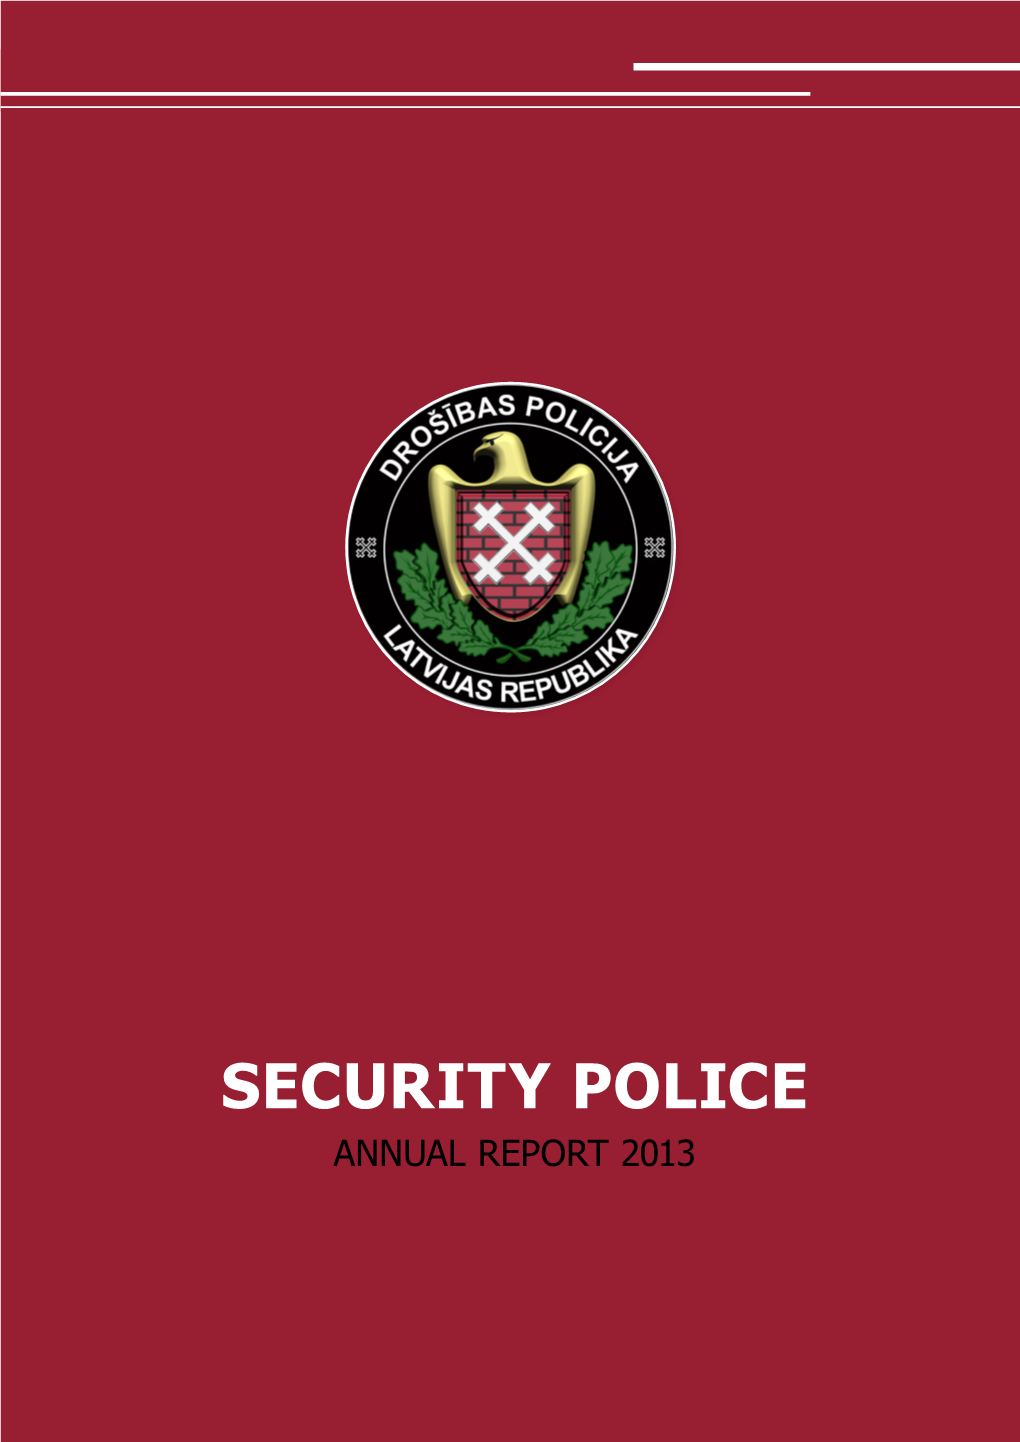 REPORT 2013 the Author of the Photos Included in the Annual Report Is Security Police Annual Report About the Activities of the Security Police in 2013